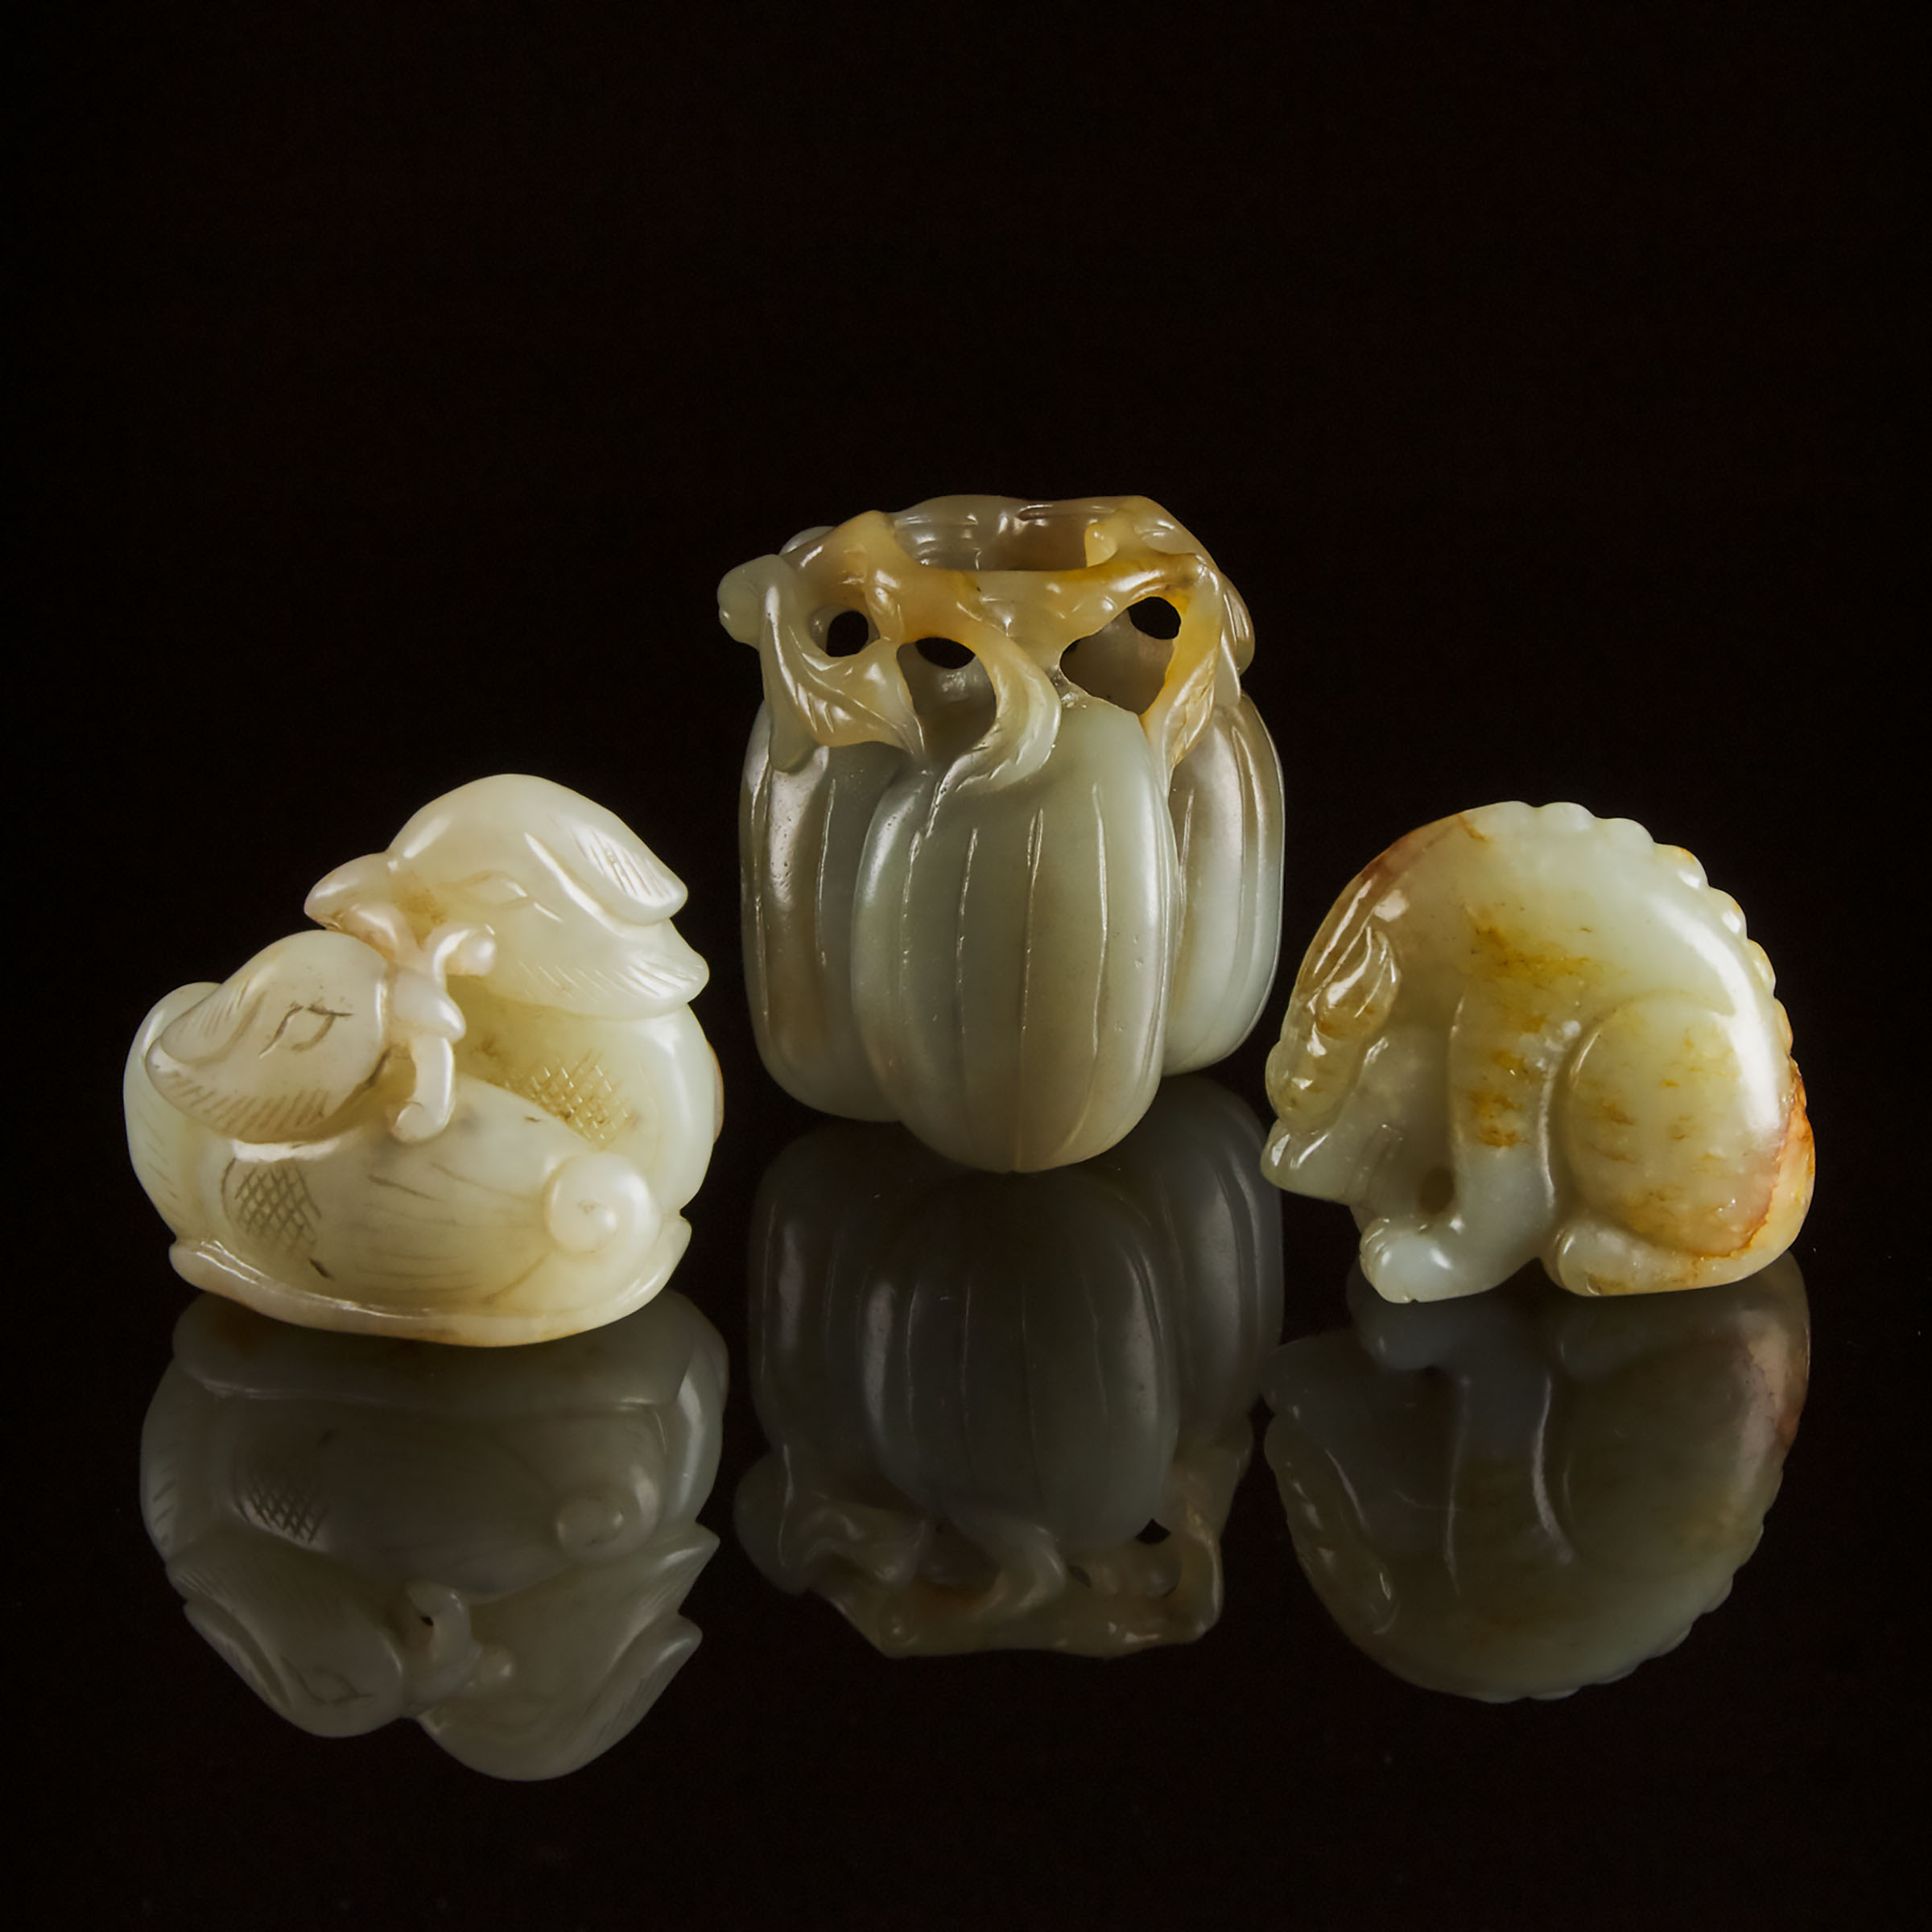 A Group of Three White and Celadon Jade Carvings